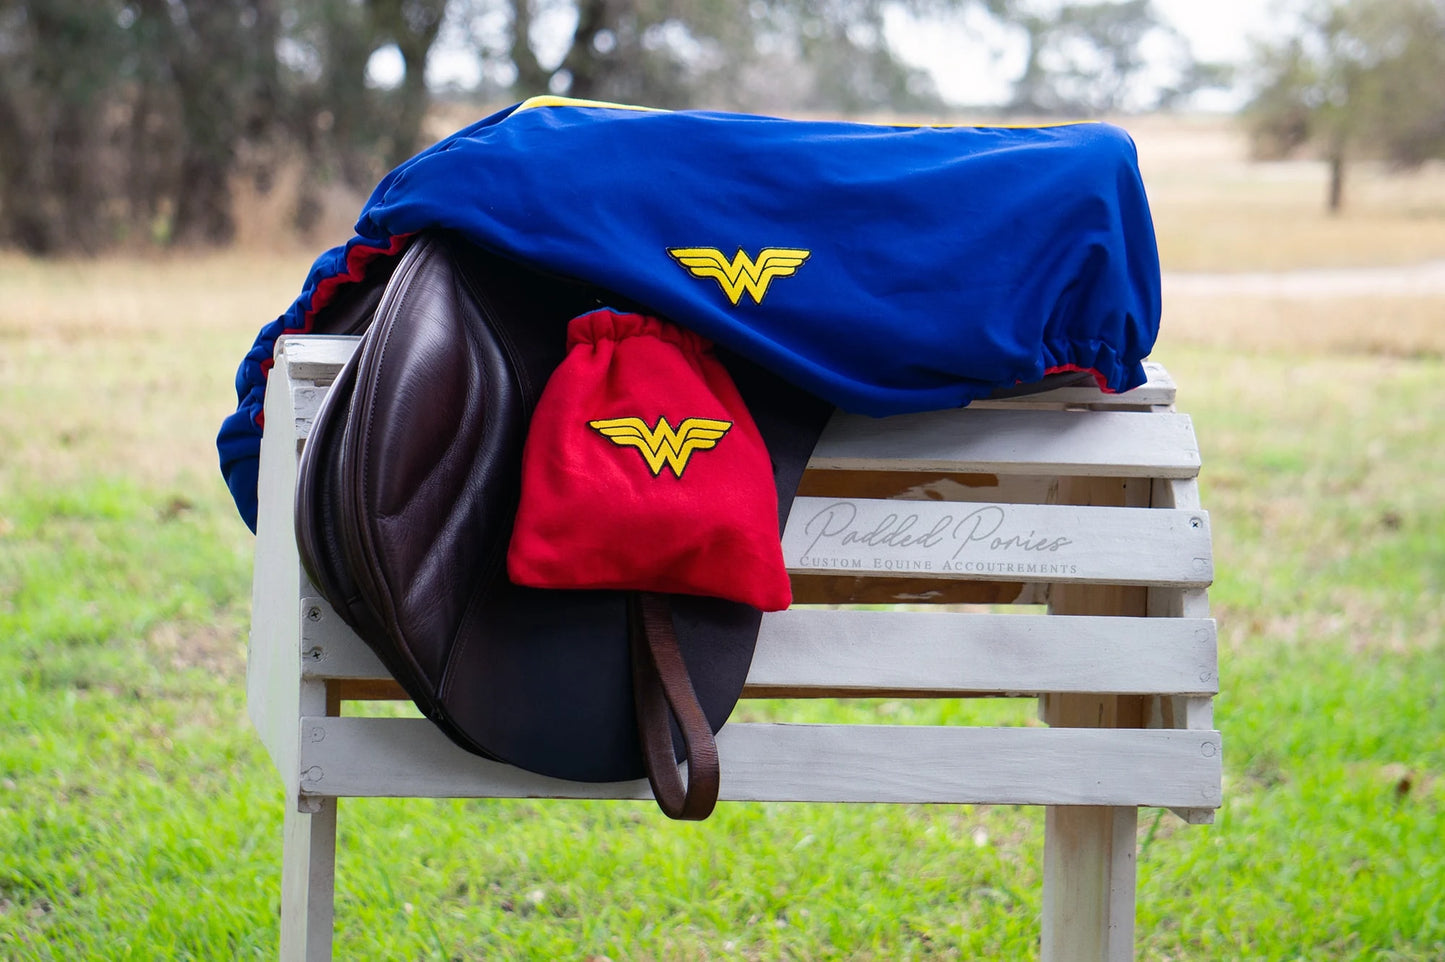 Royal Blue DC Comics Wonder Woman Superhero Patch All Purpose Saddle Cover Set with Matching Stirrup Covers